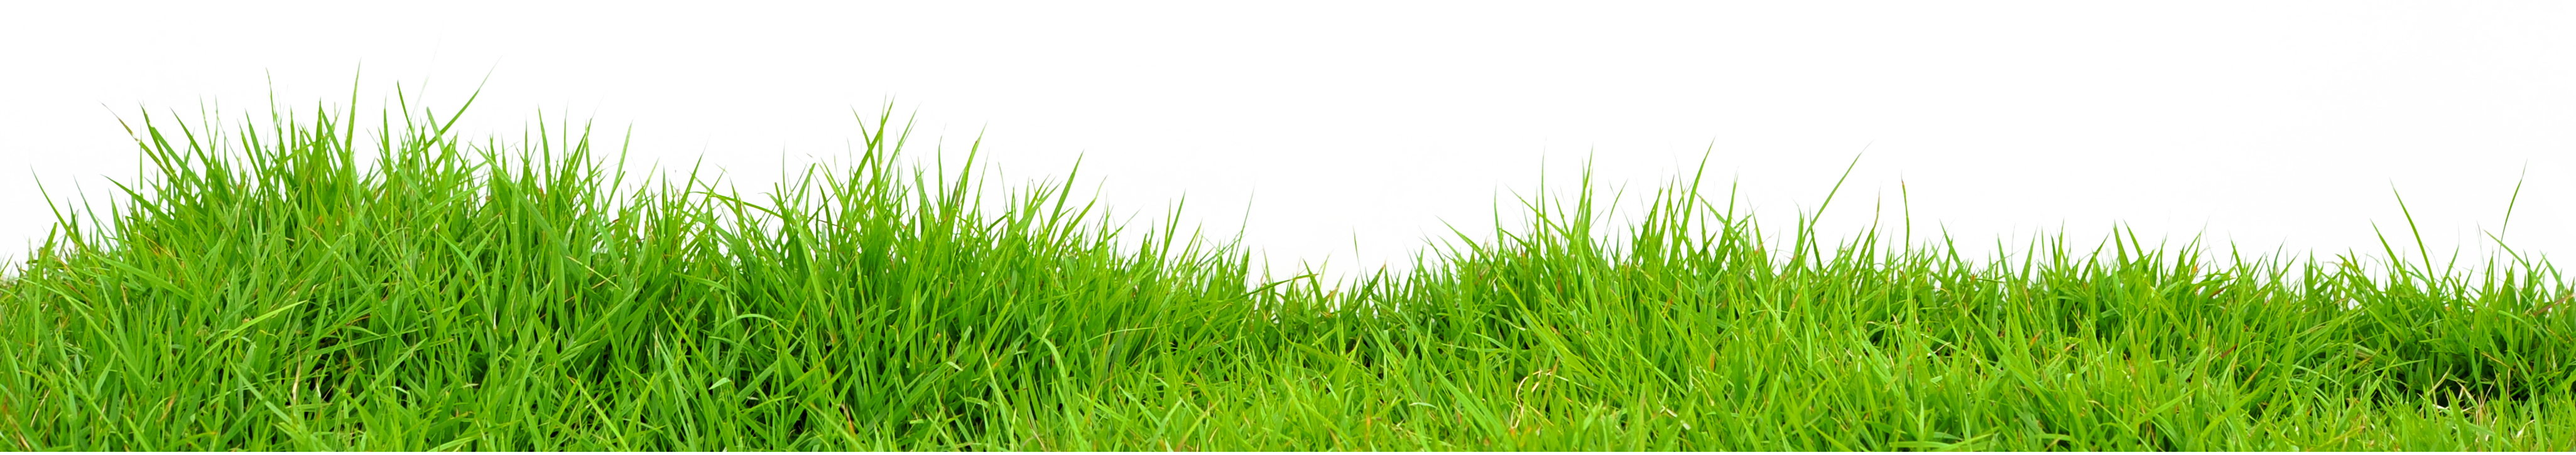 Grass Png Images PNG Image